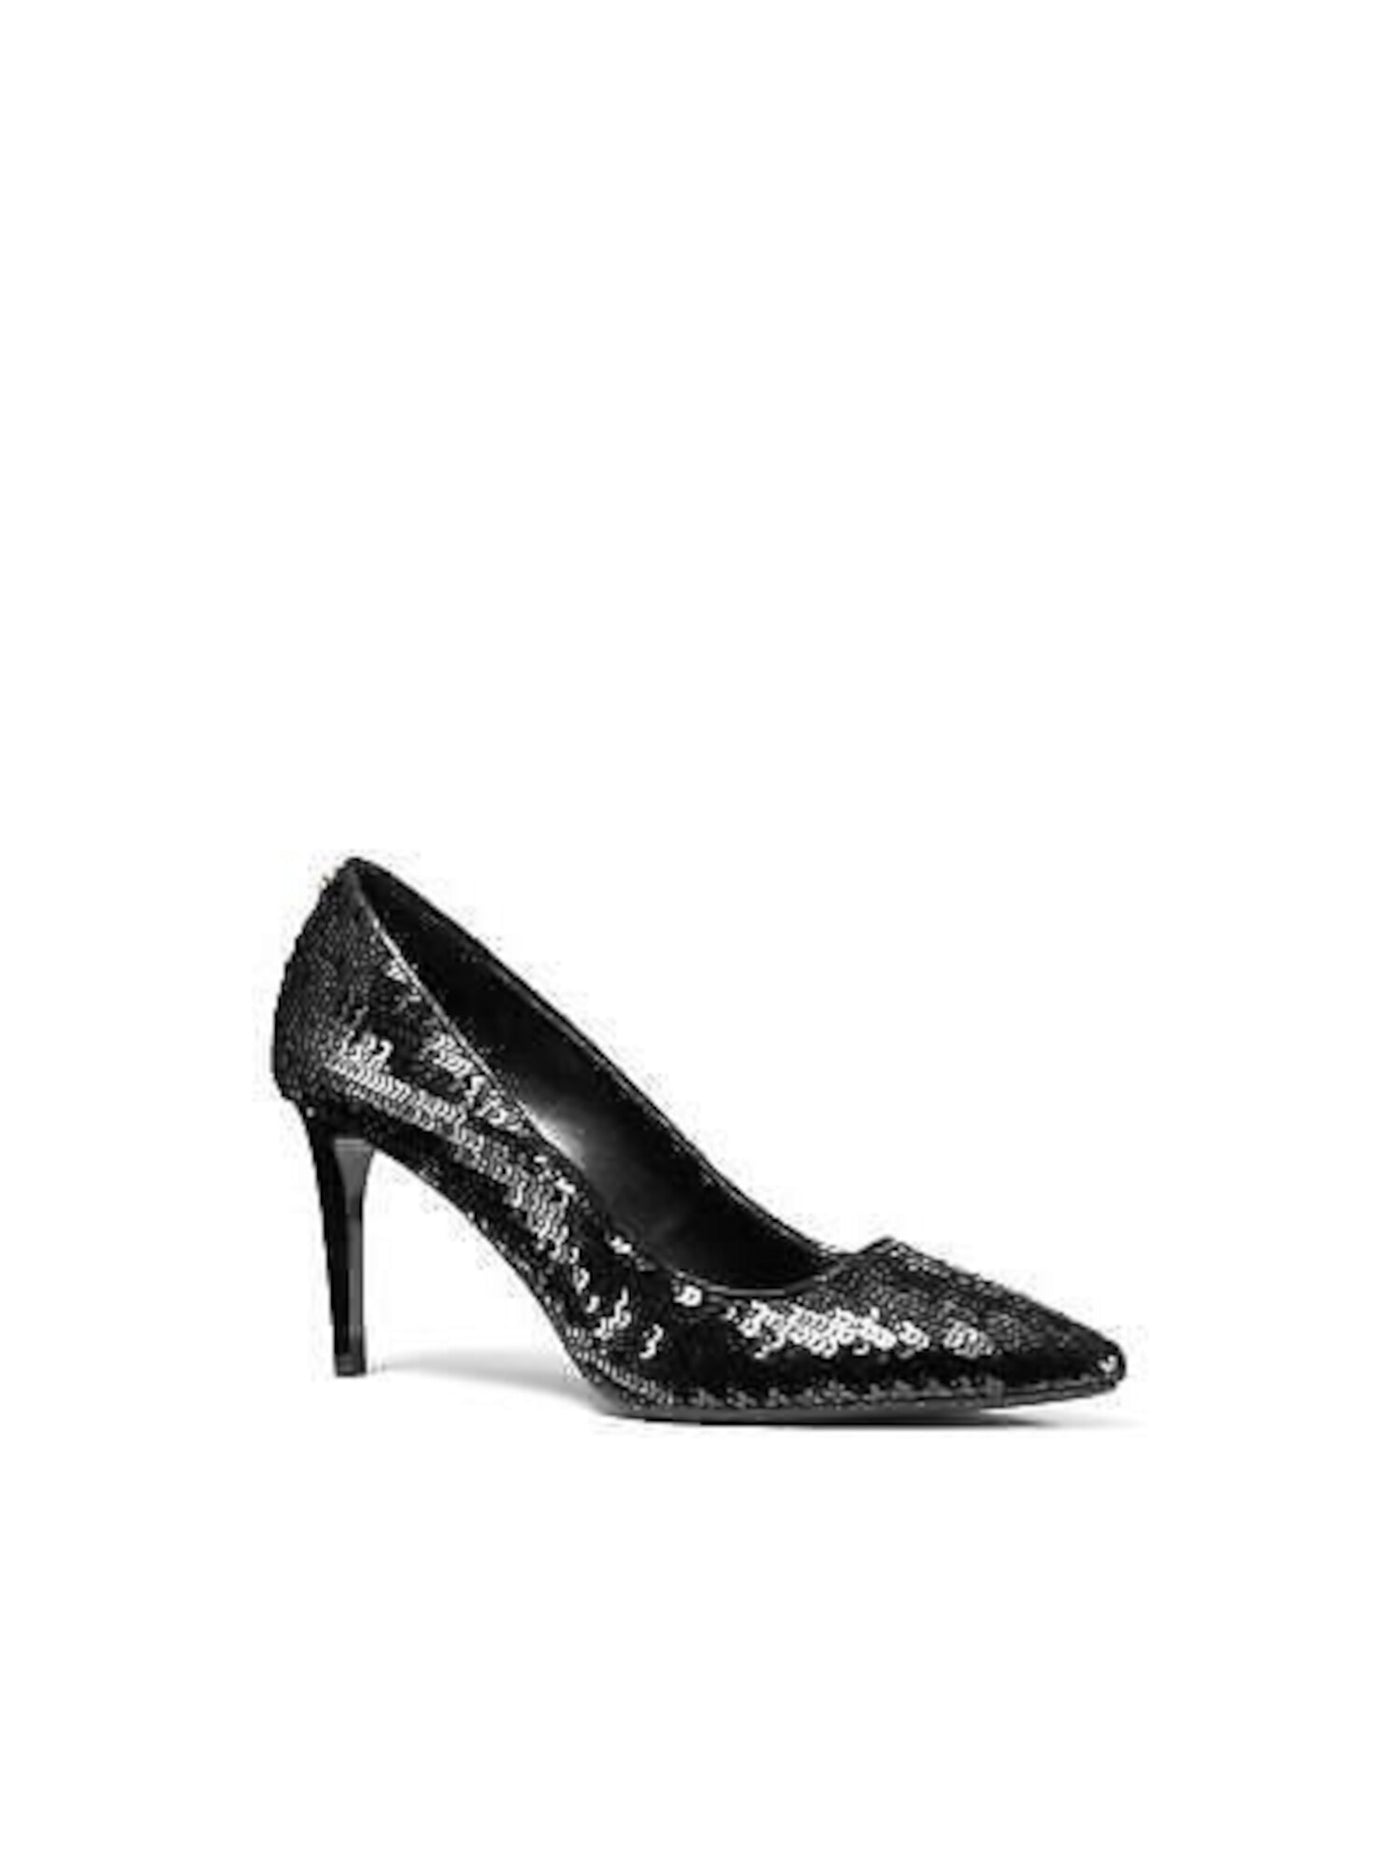 MICHAEL MICHAEL KORS Womens Black Cushioned Sequined Dorothy Pointed Toe Stiletto Slip On Pumps Shoes 6 M